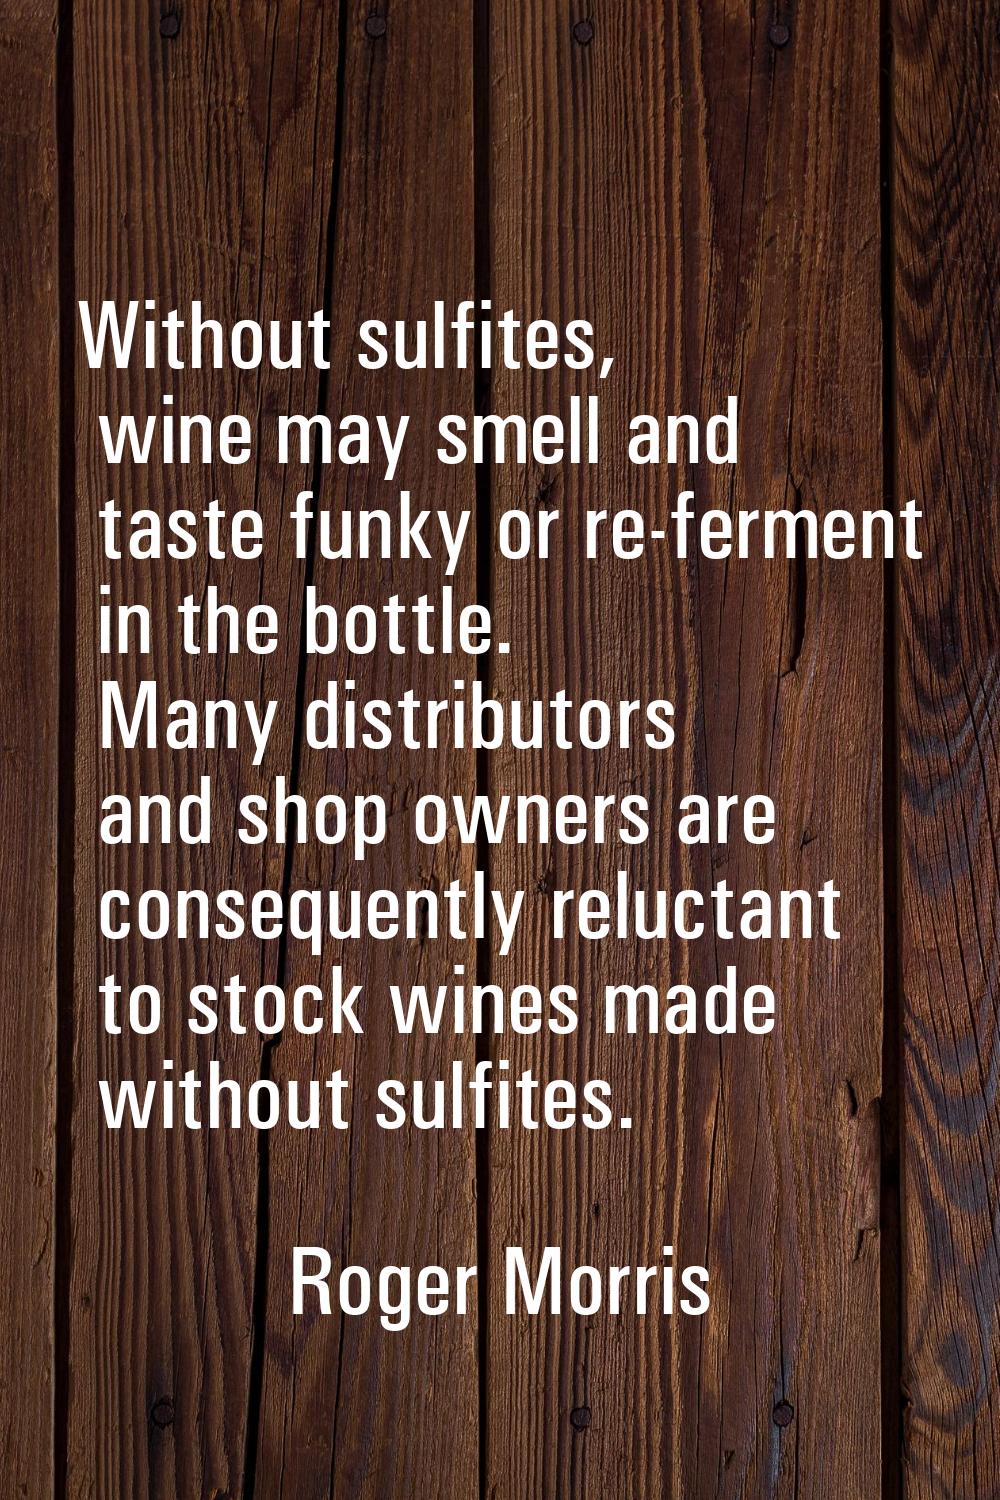 Without sulfites, wine may smell and taste funky or re-ferment in the bottle. Many distributors and